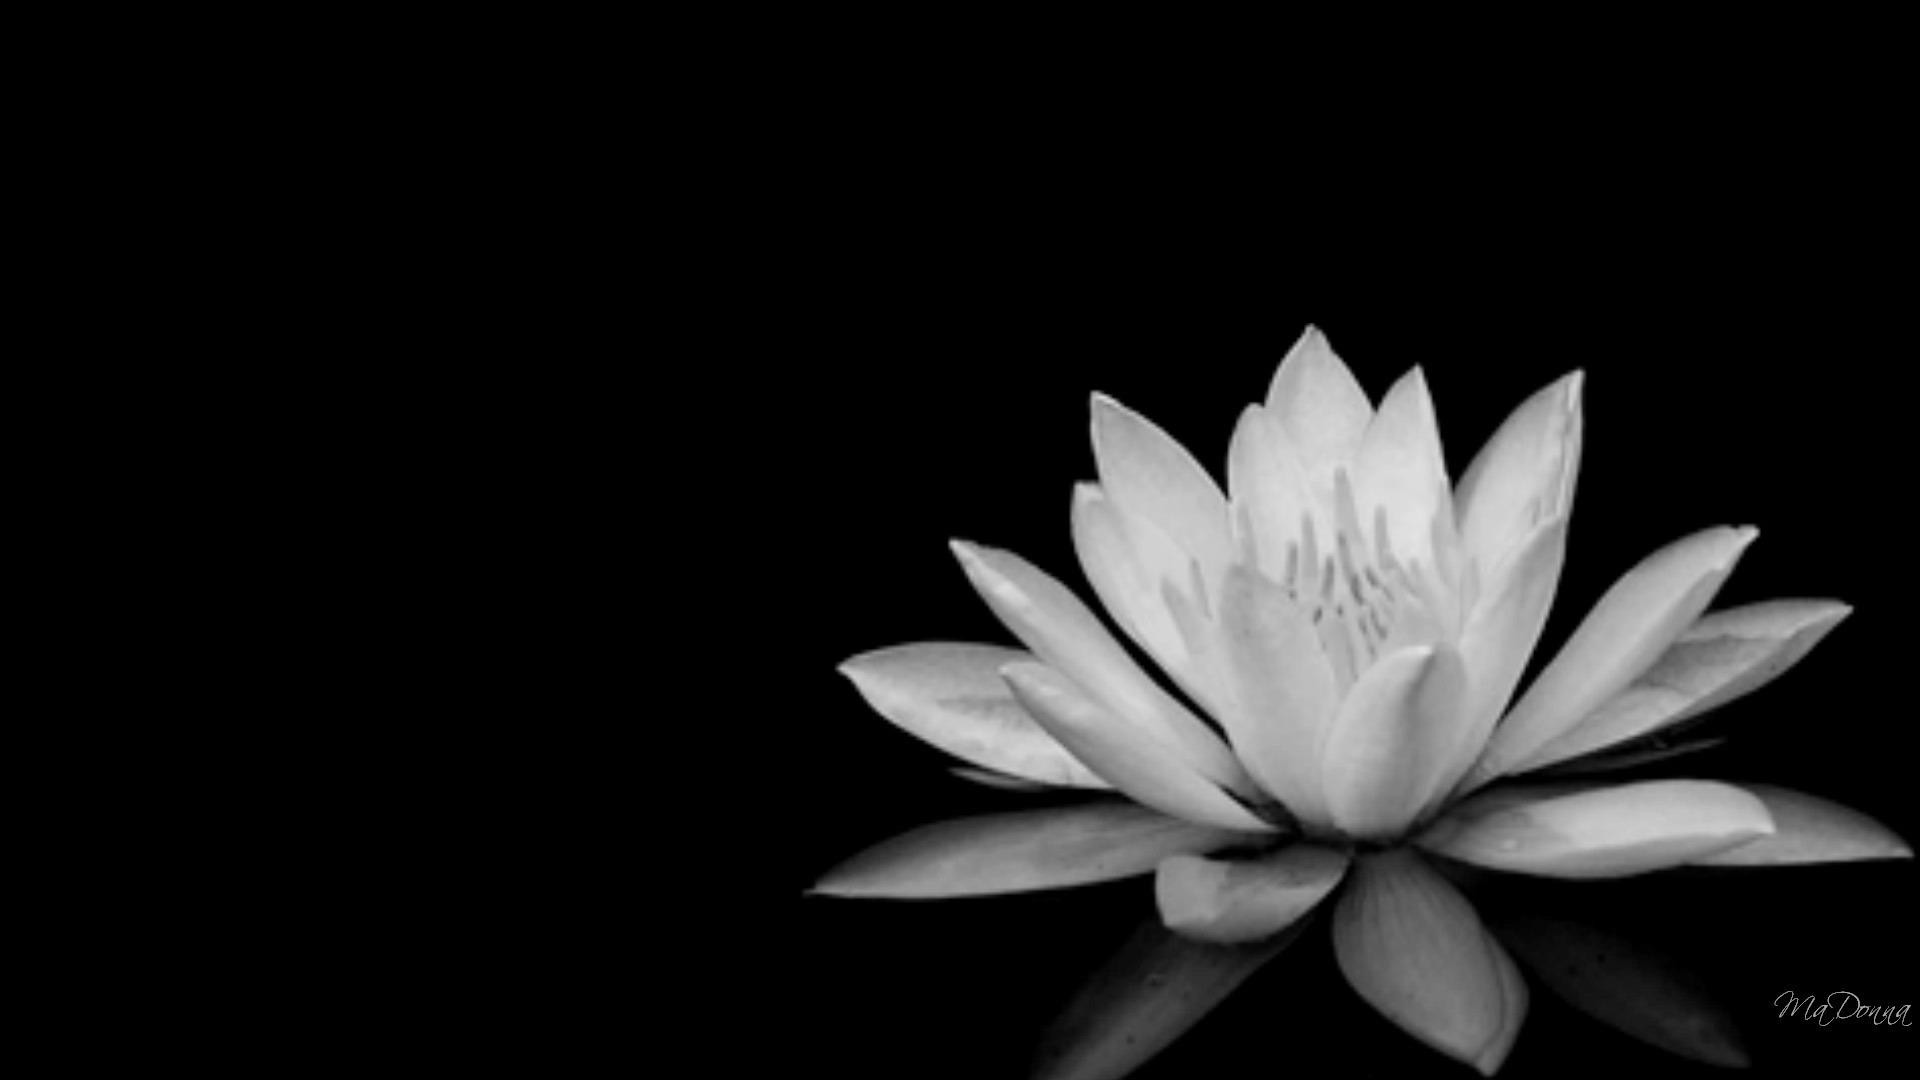 1920x1080 Flower in black and white image.